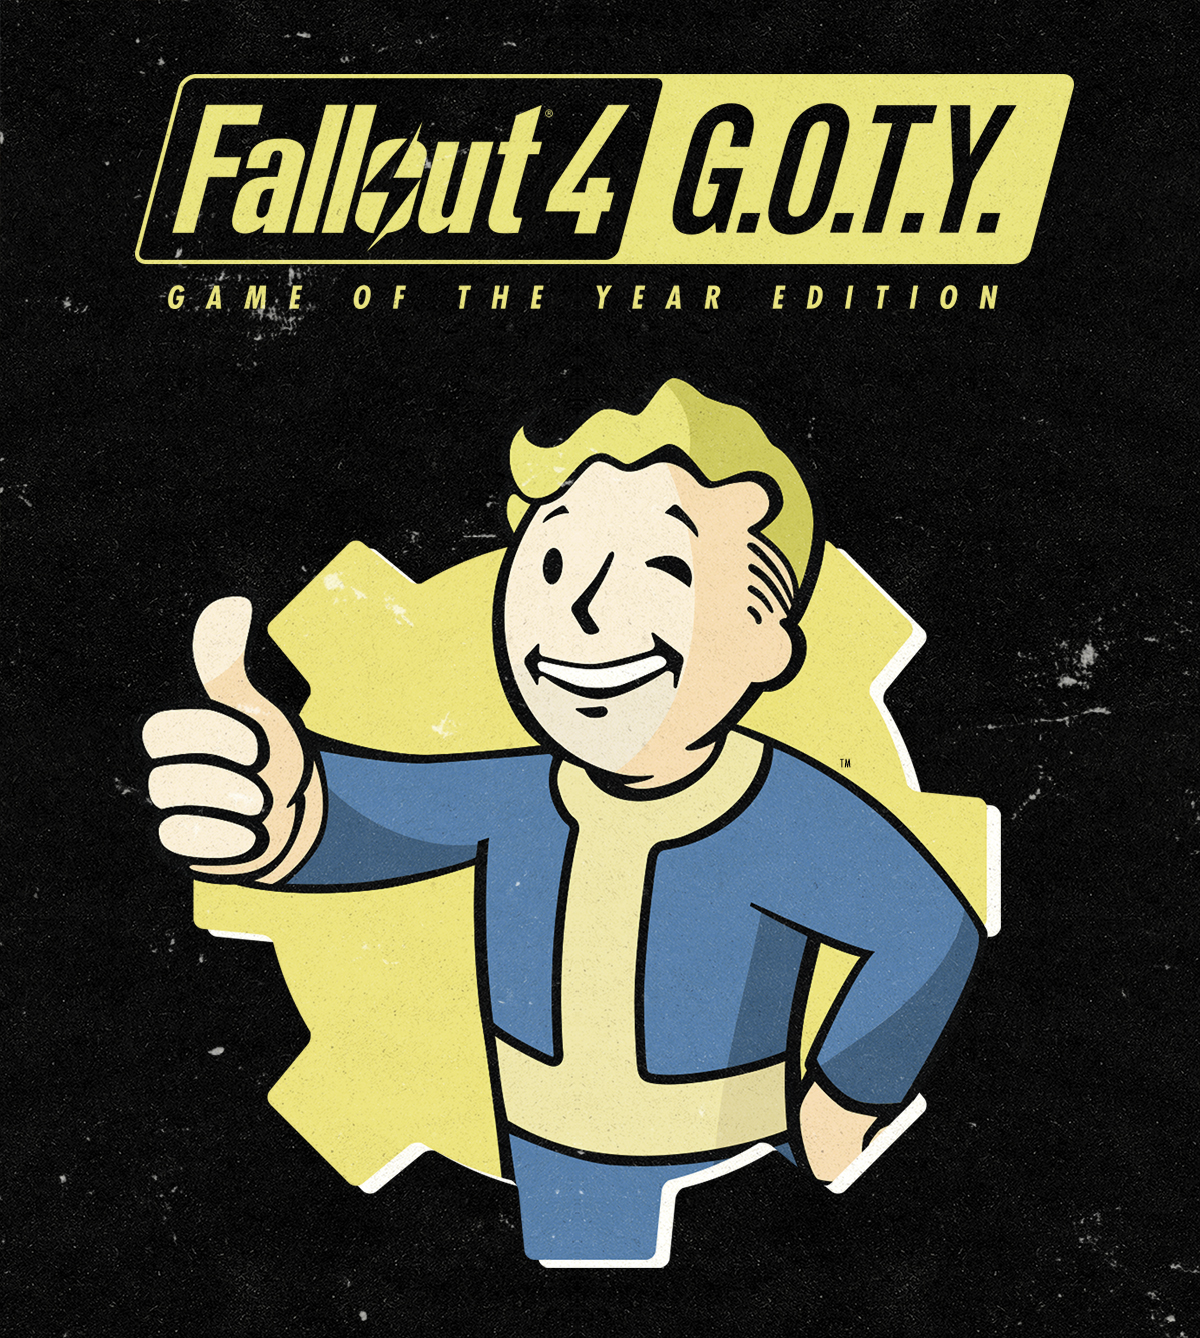 Fallout 4 Game Of The Year Editionと新価格版の発売を決定 Game Watch